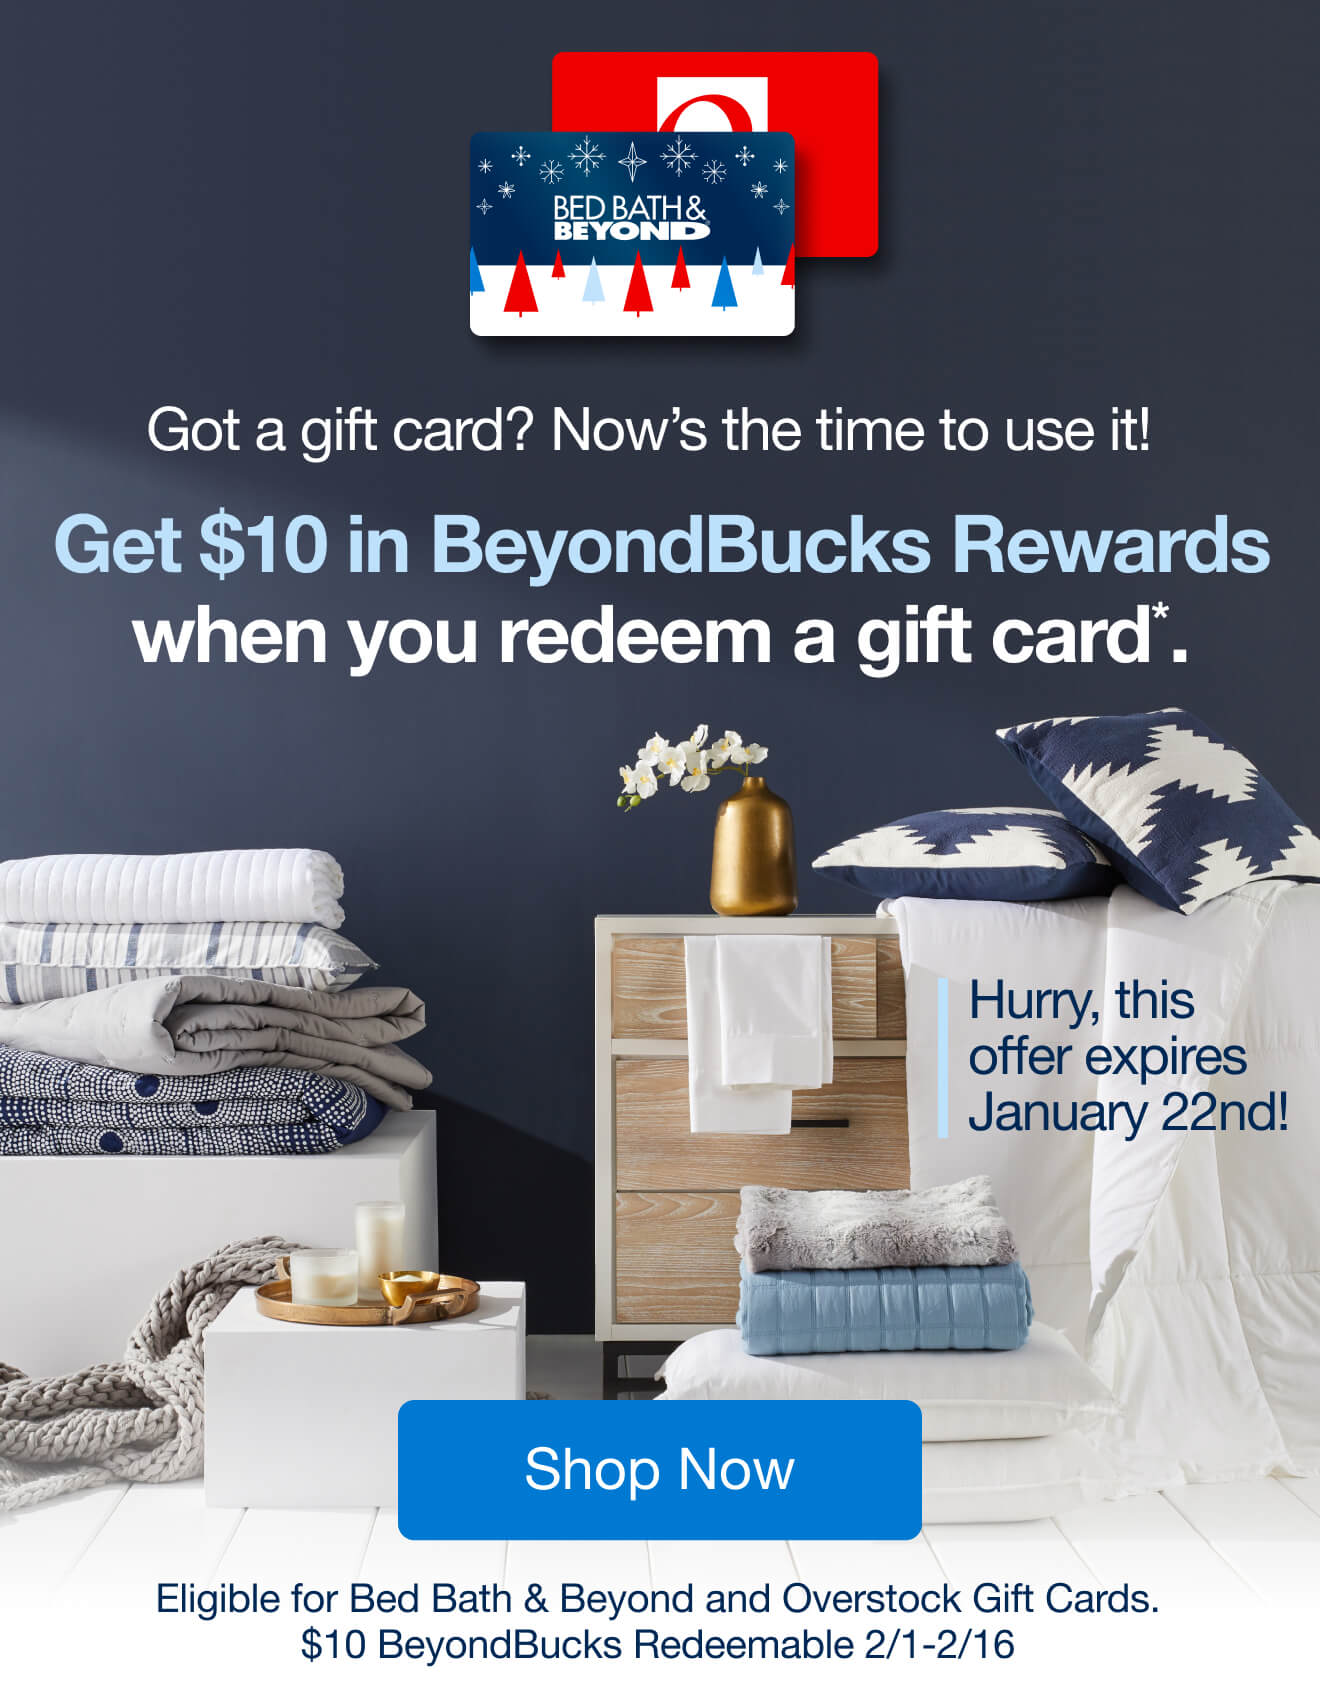 Use your Bed Bath & Beyond Gift Cards now